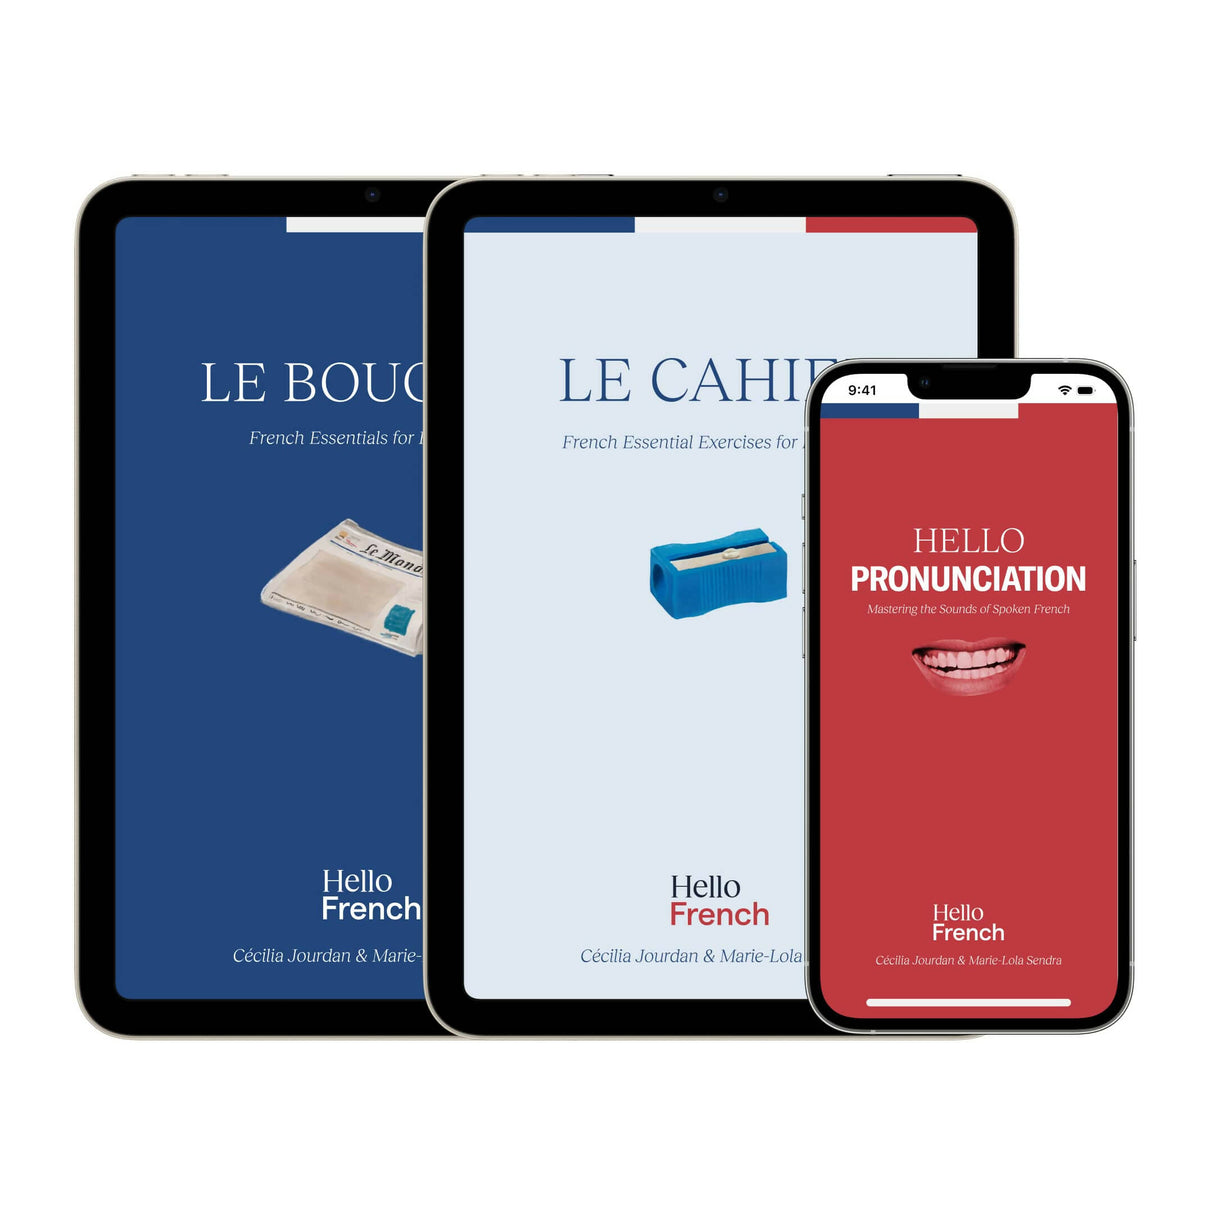 The Beginner Bundle: French Essentials, Exercises, and Pronunciation for Beginners